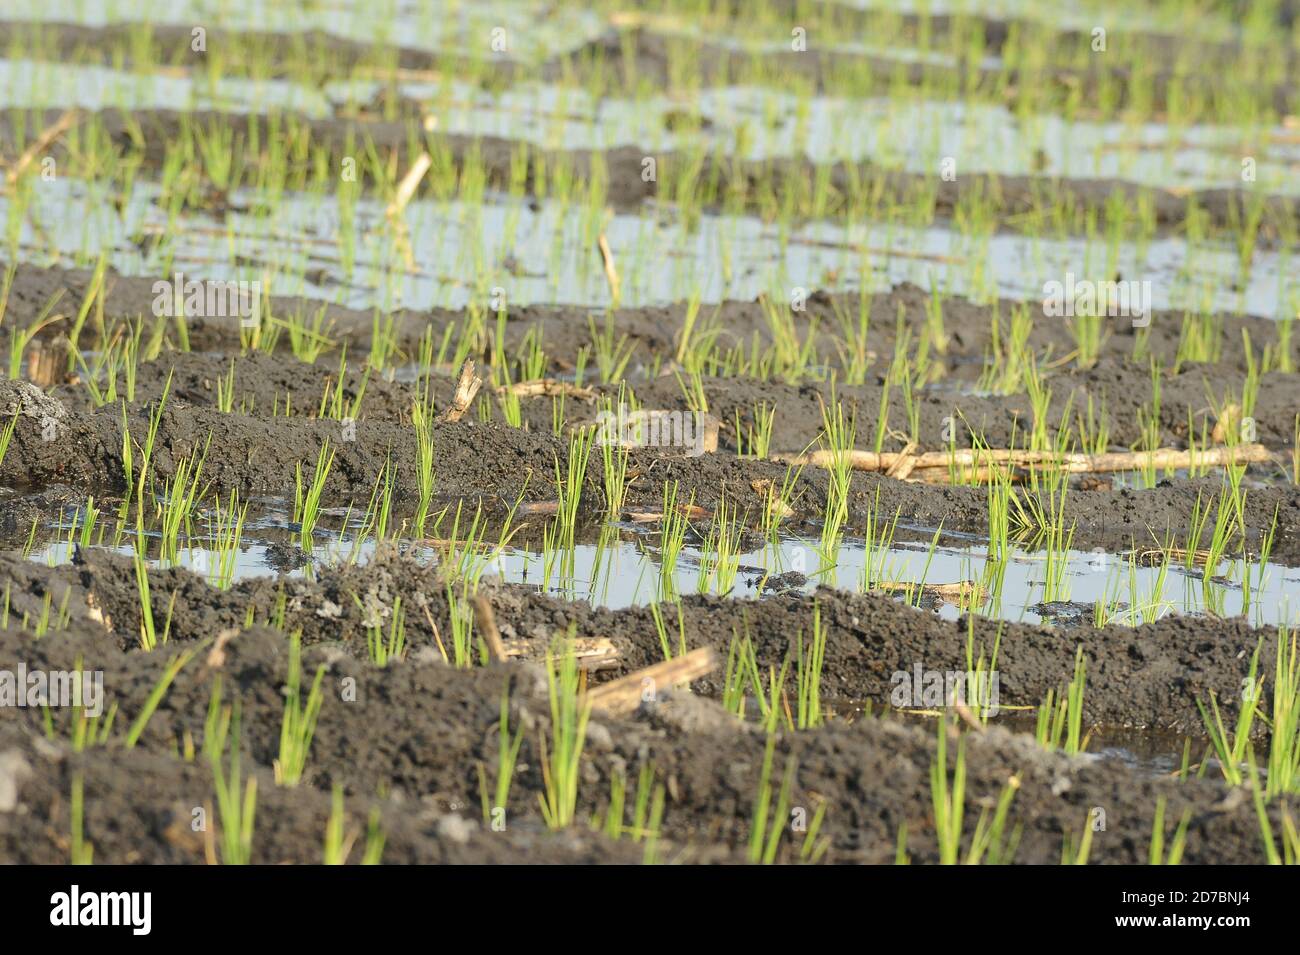 Organic rice growing fields in Morelos, Mexico Stock Photo